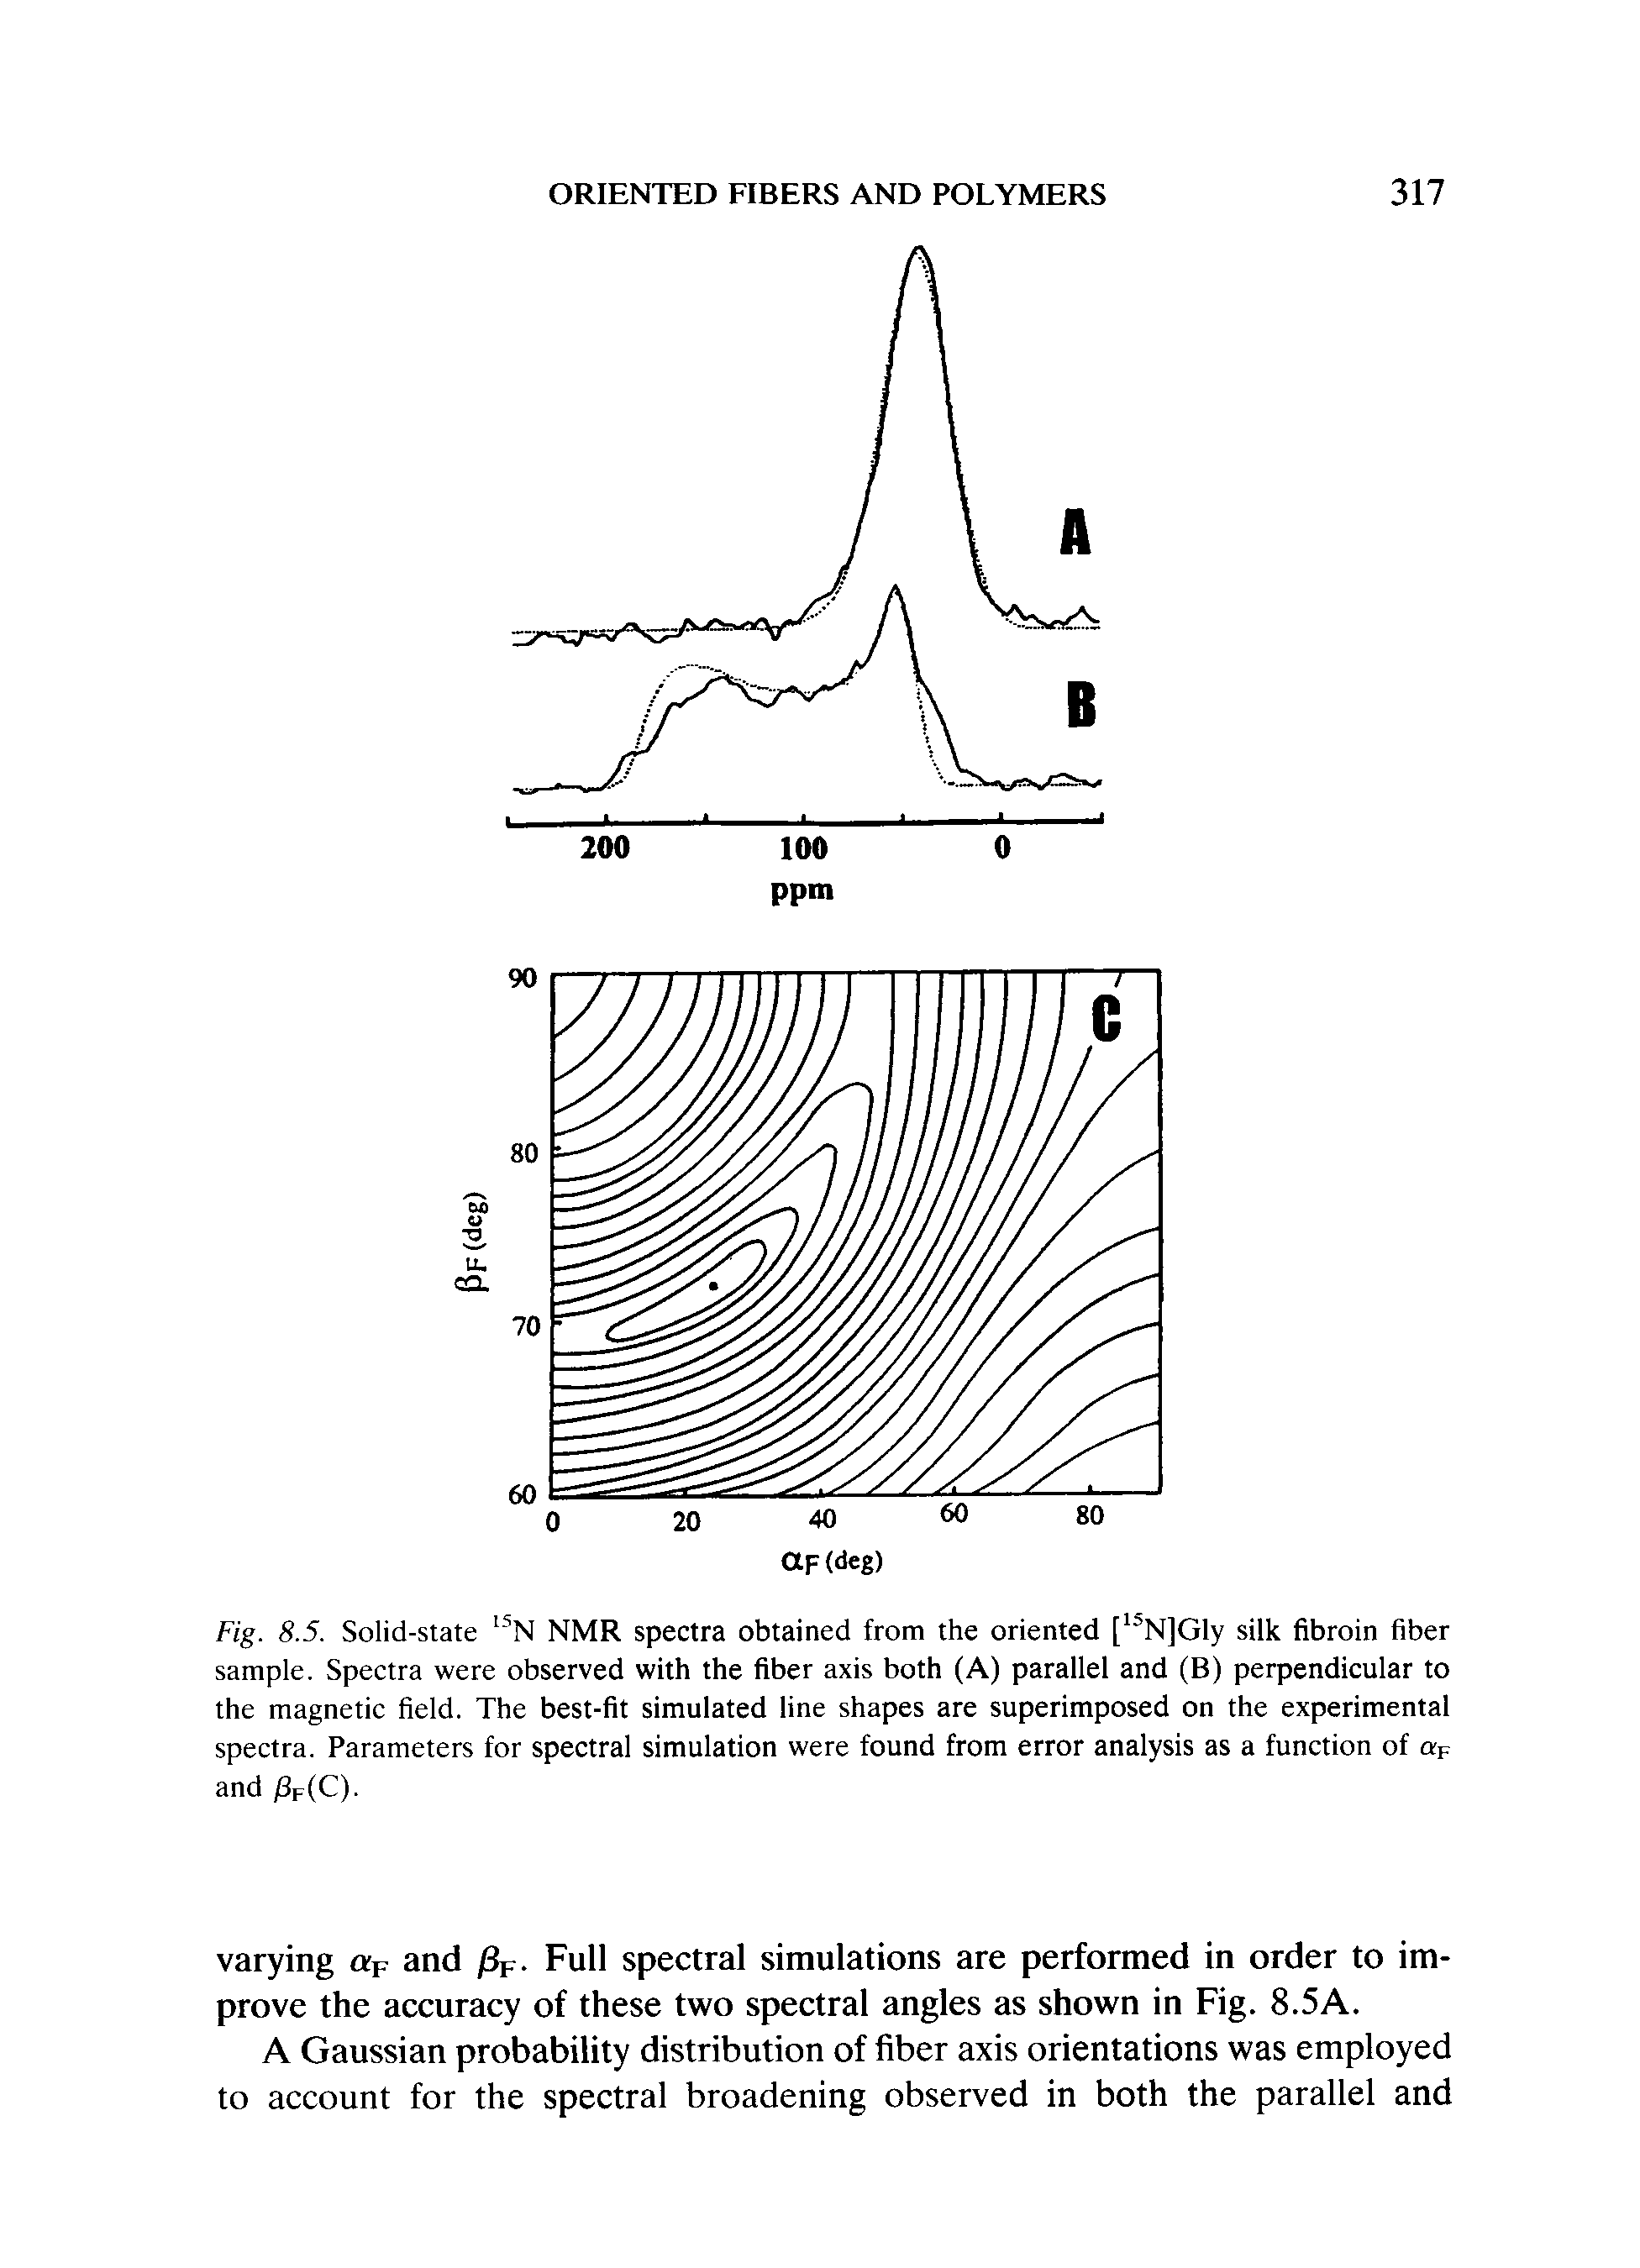 Fig. 8.5. Solid-state N NMR spectra obtained from the oriented [ N]Gly silk fibroin fiber sample. Spectra were observed with the fiber axis both (A) parallel and (B) perpendicular to the magnetic field. The best-fit simulated line shapes are superimposed on the experimental spectra. Parameters for spectral simulation were found from error analysis as a function of ap and Pf(C).